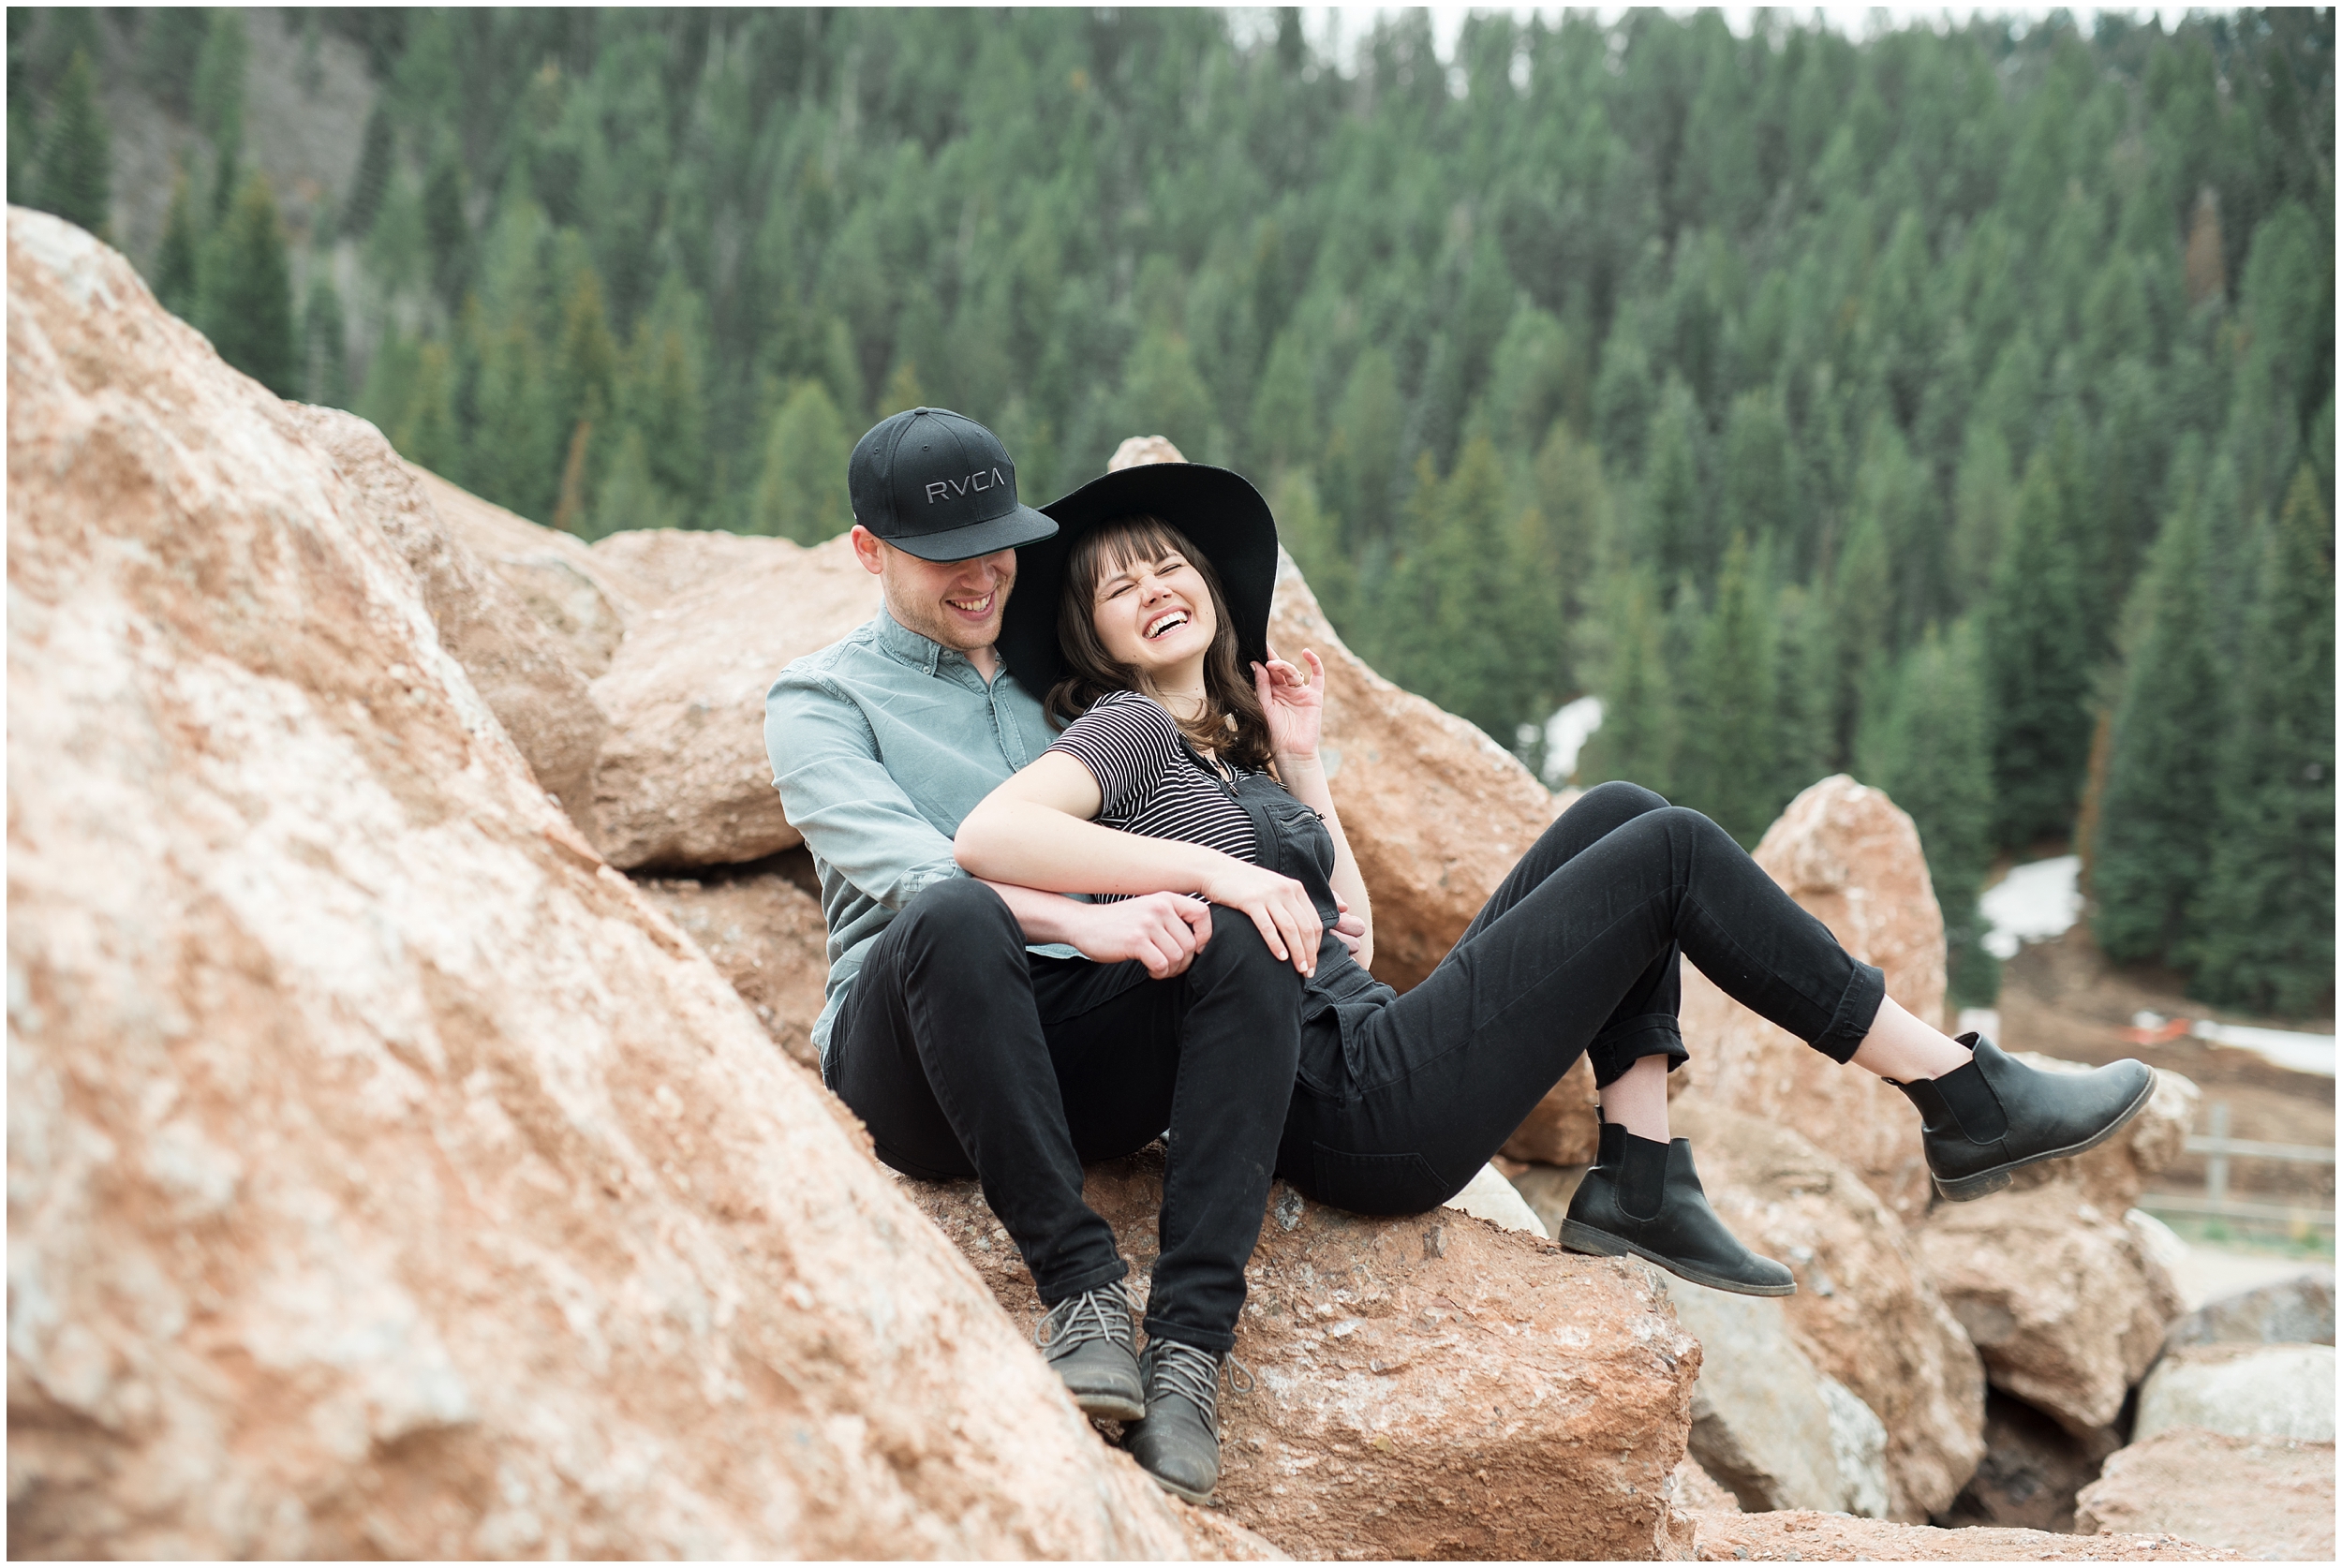 Mountainside engagements, red rock engagements, forest engagements, engagements in hats, field engagements, Utah senior photos, orchard senior photos, photographers in Utah, Utah family photographer, family photos Utah, Kristina Curtis photography, Kristina Curtis Photographer, www.kristinacurtisphotography.com